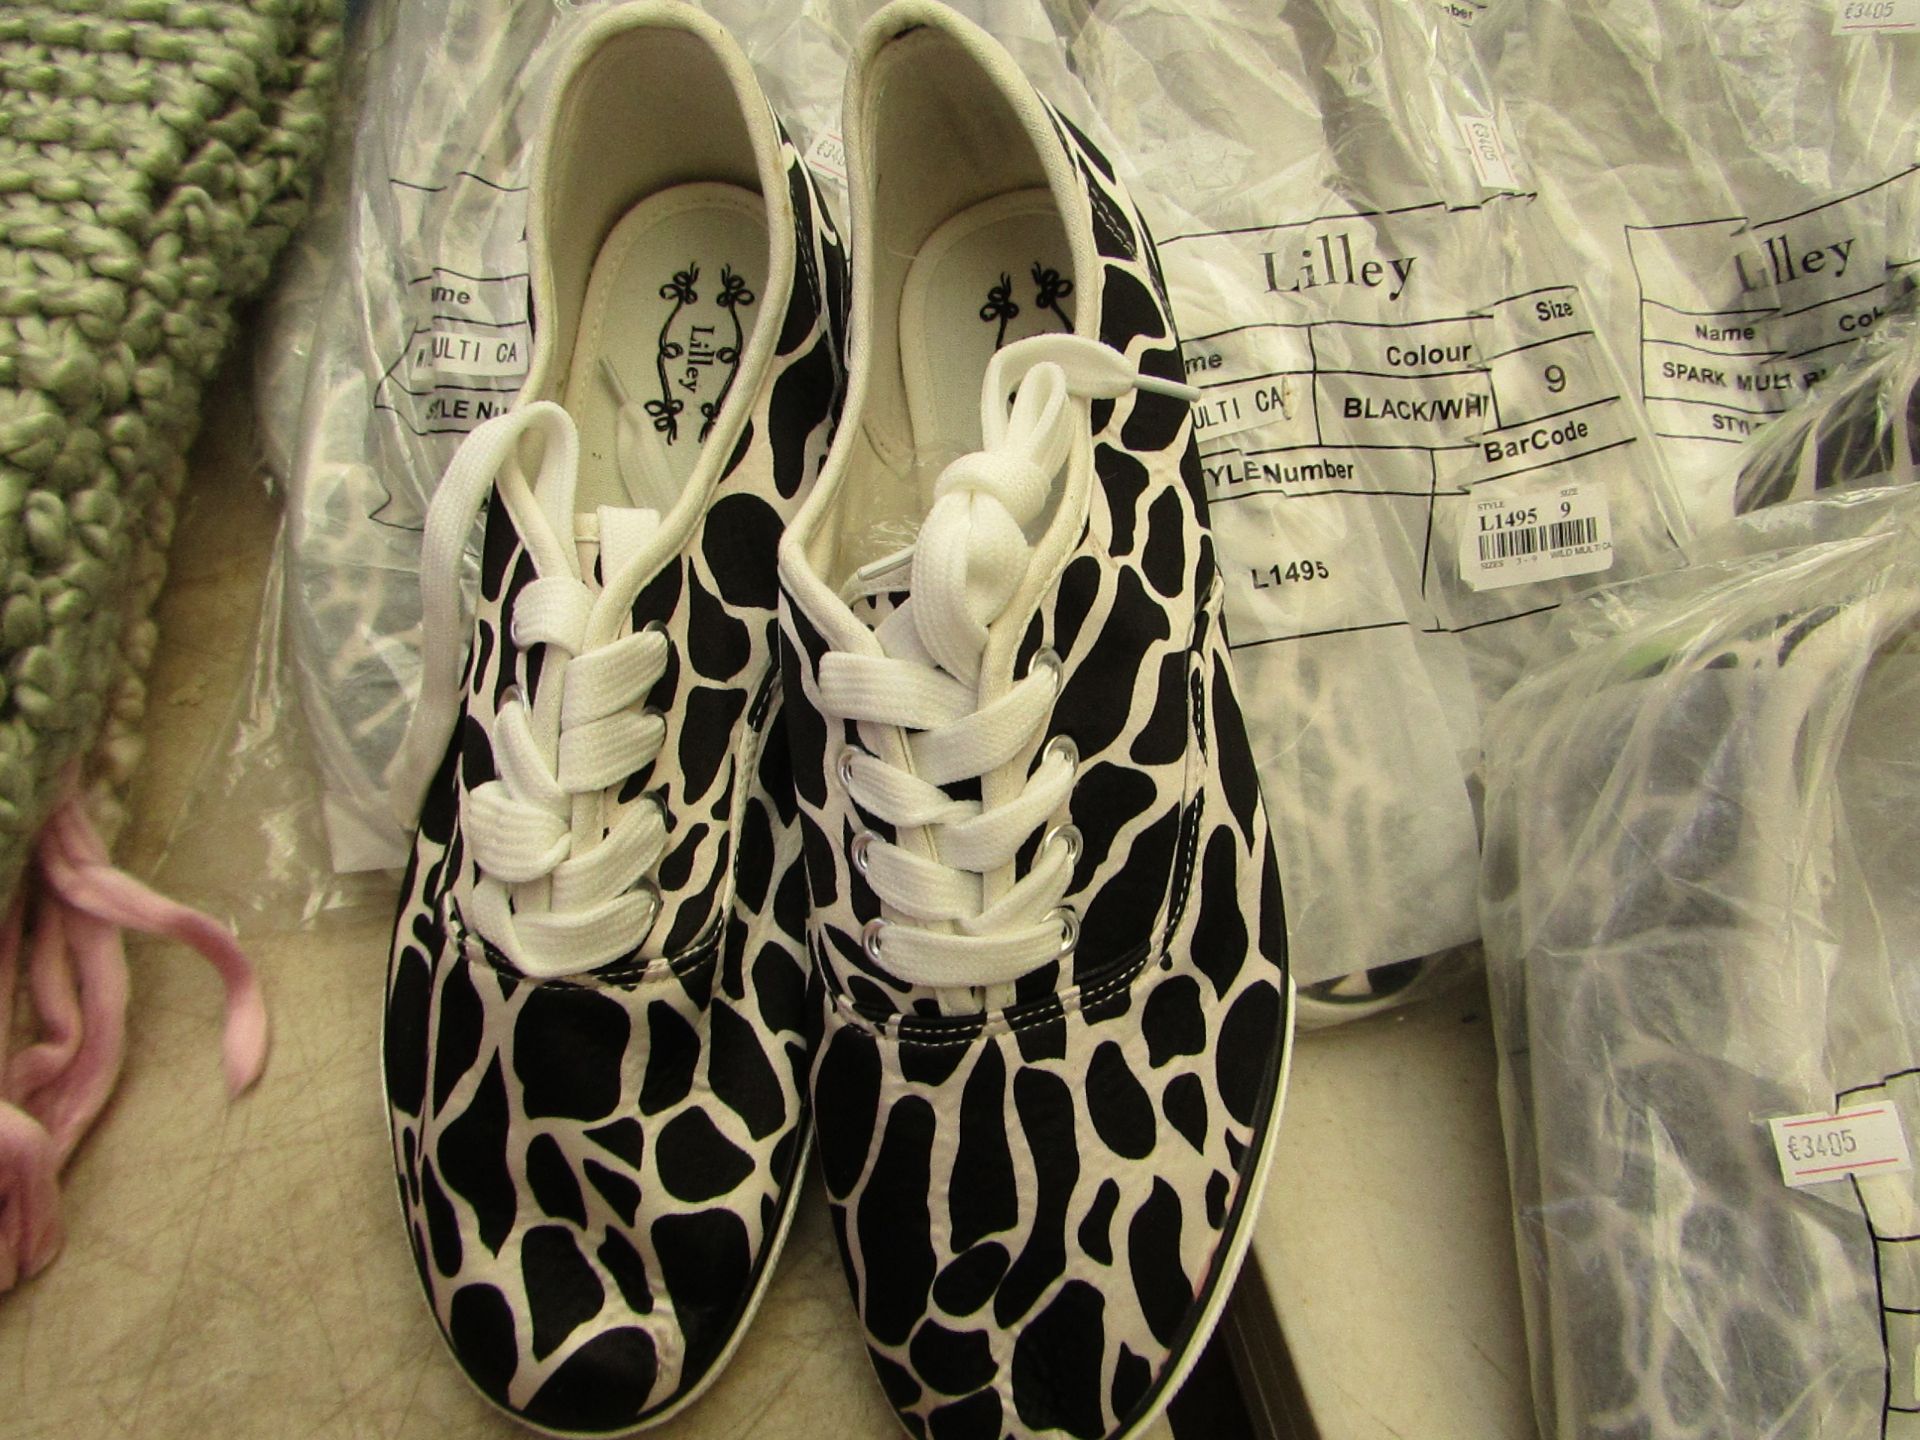 3 X Pairs of Animal Print Canvas shoes all size 9 all new & packaged